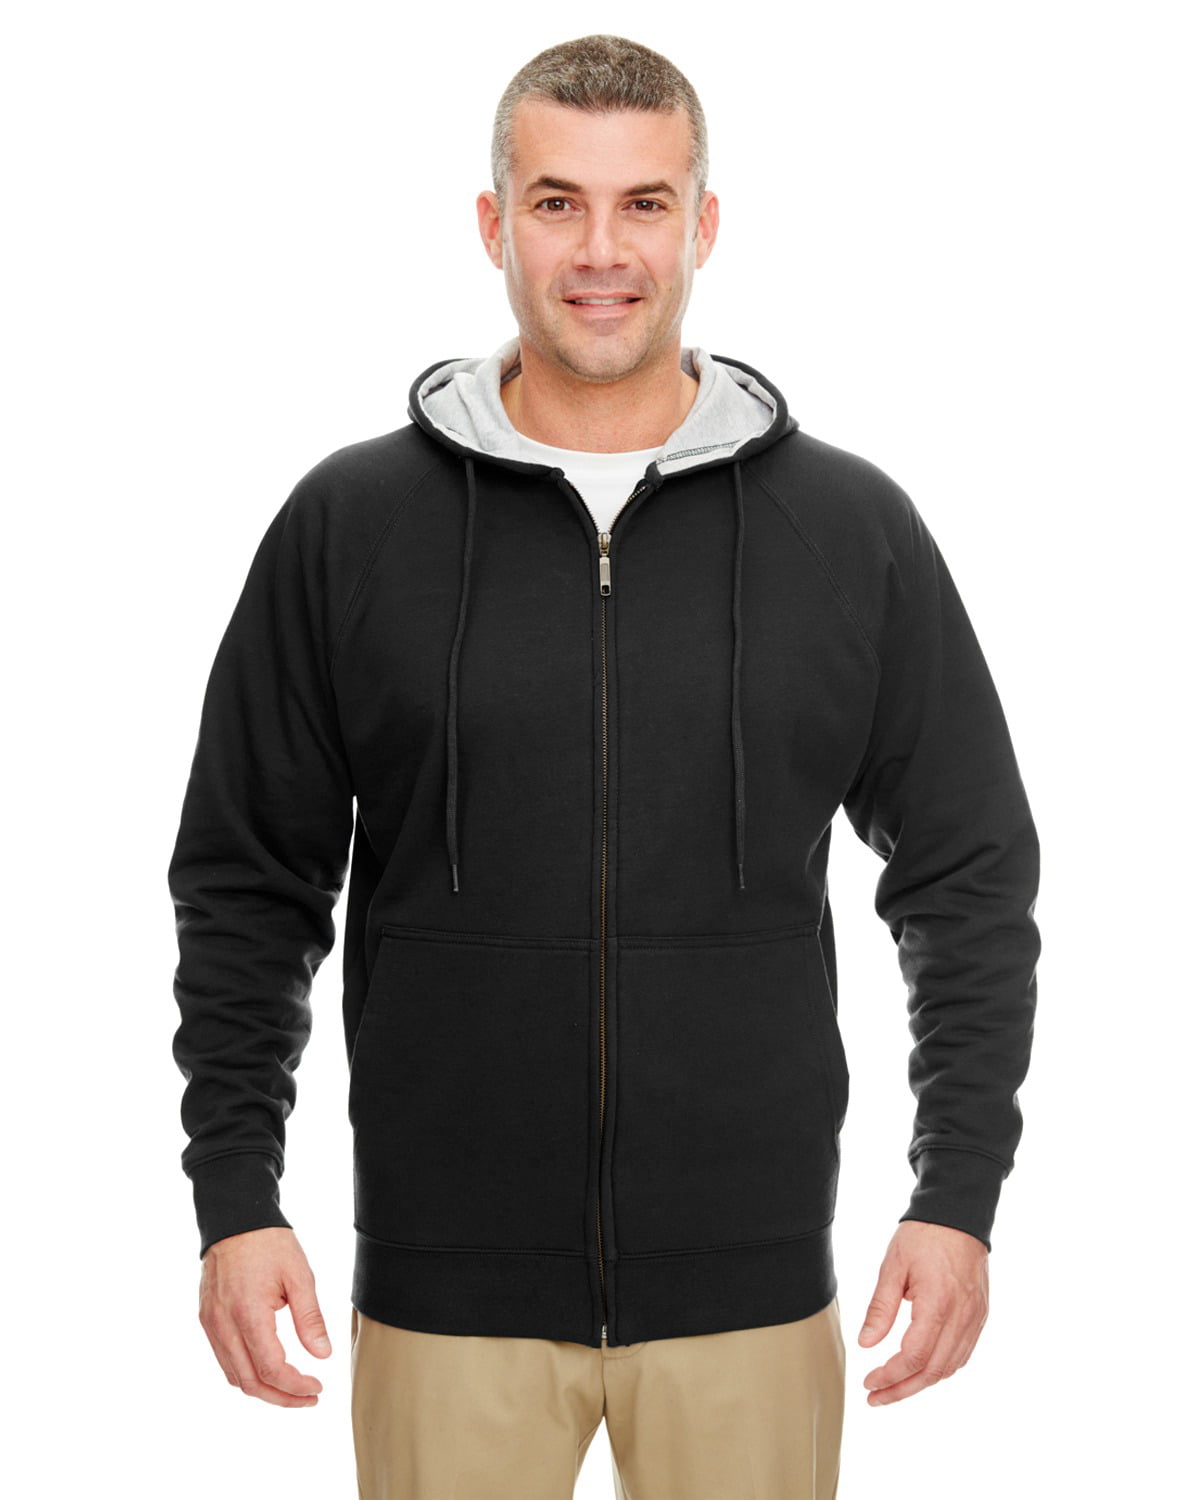 UltraClub - Ultraclub 8463 Adult Rugged Wear Thermal-Lined Full-Zip ...